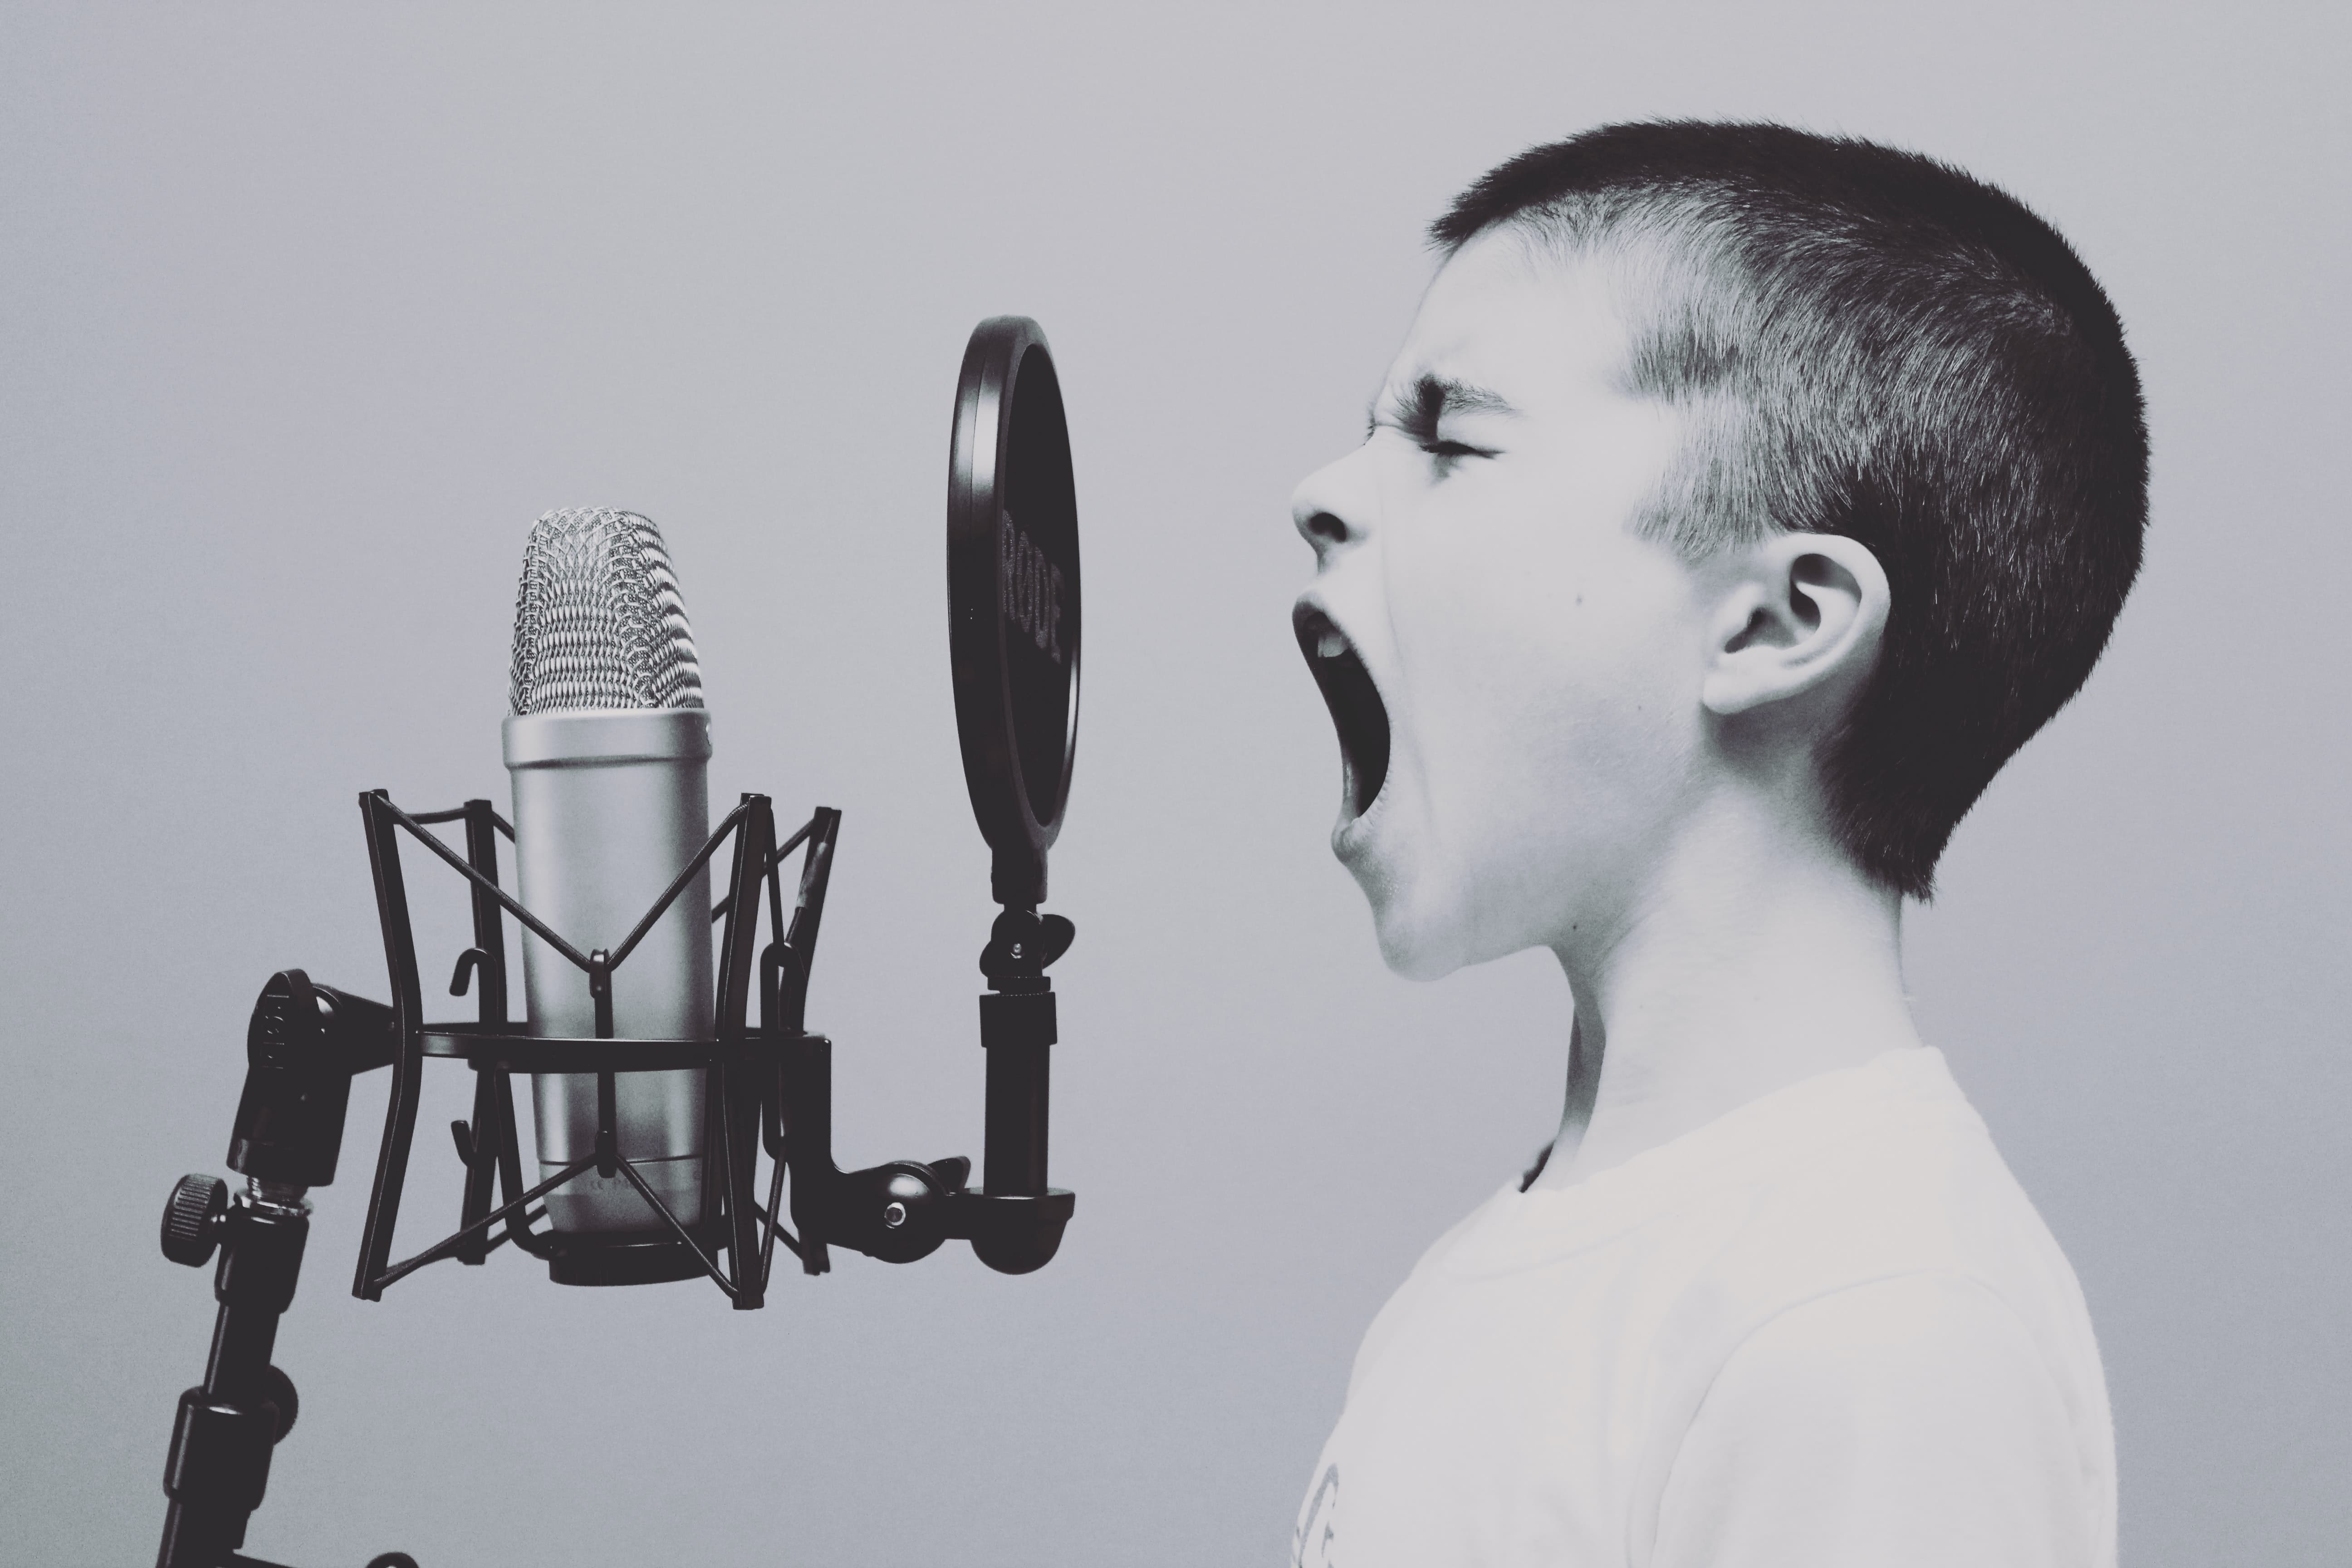 A young short haired kid yells into a microphone